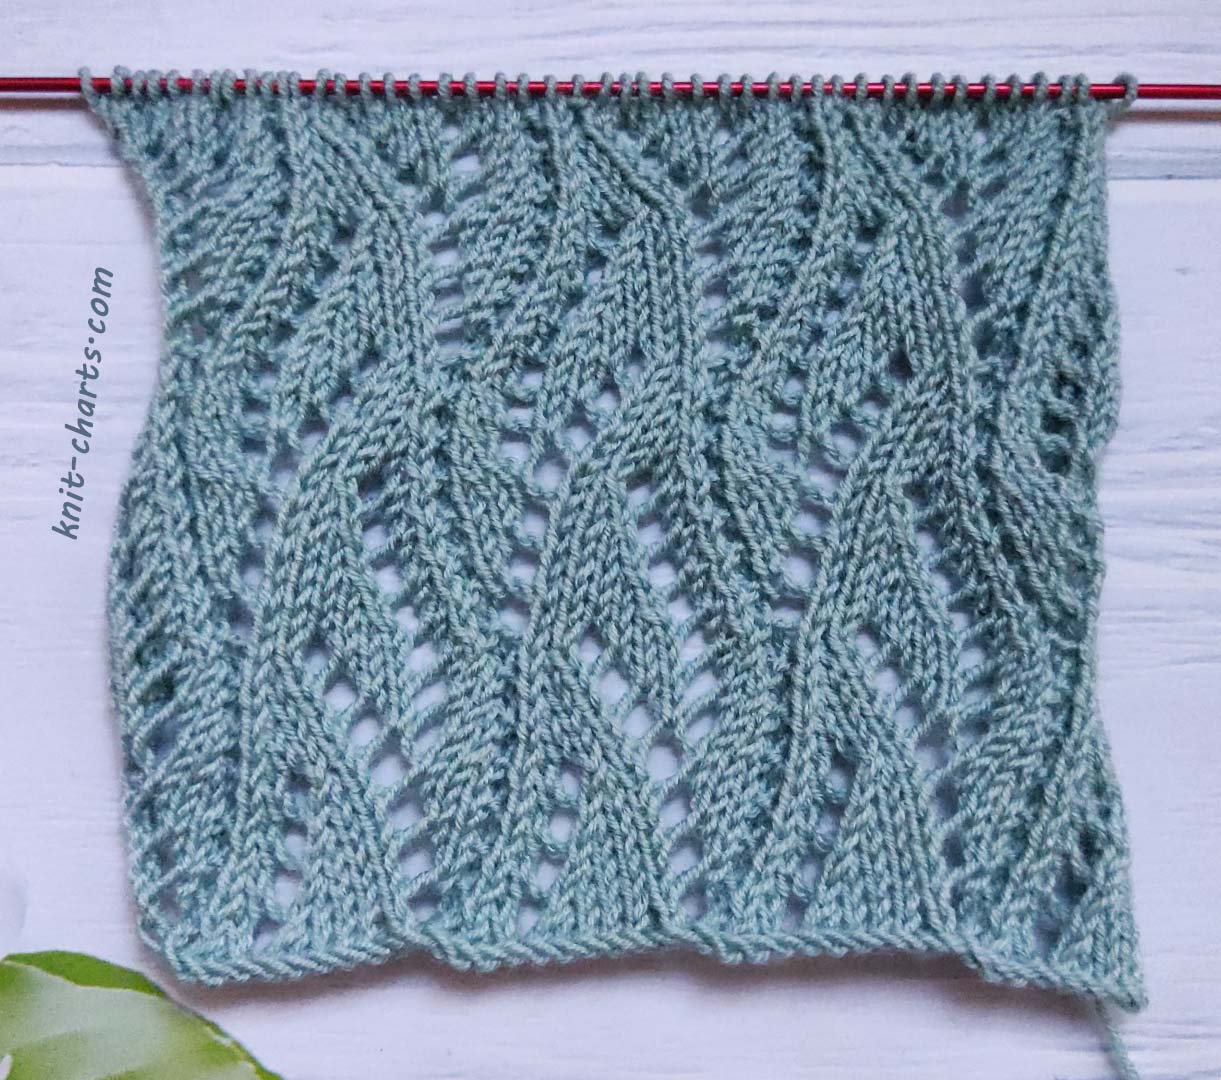 Wavy stitch knit pattern for beginners and advanced knitters